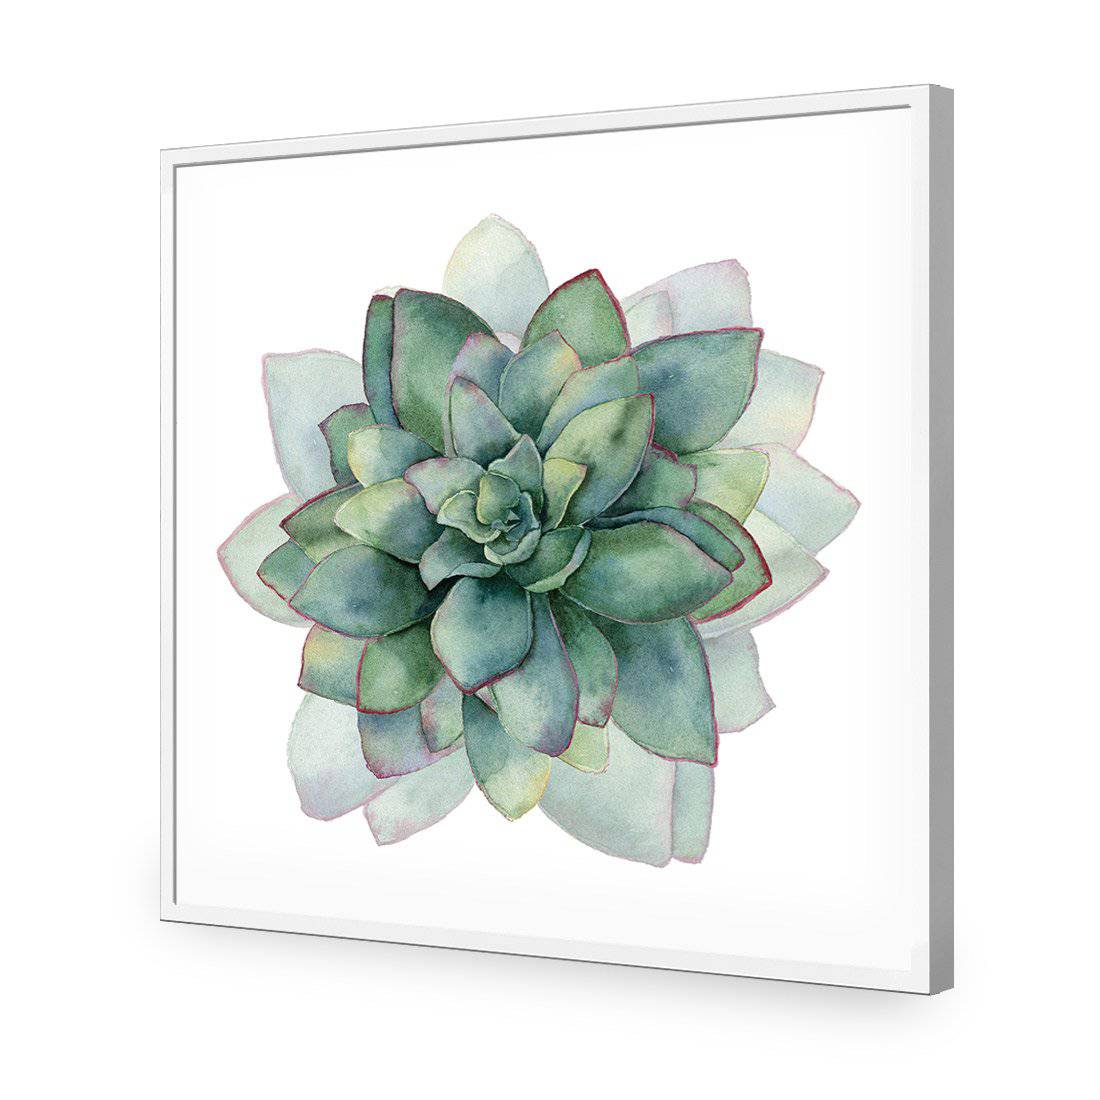 Succulent Spiral, Square-Acrylic-Wall Art Design-Without Border-Acrylic - White Frame-37x37cm-Wall Art Designs